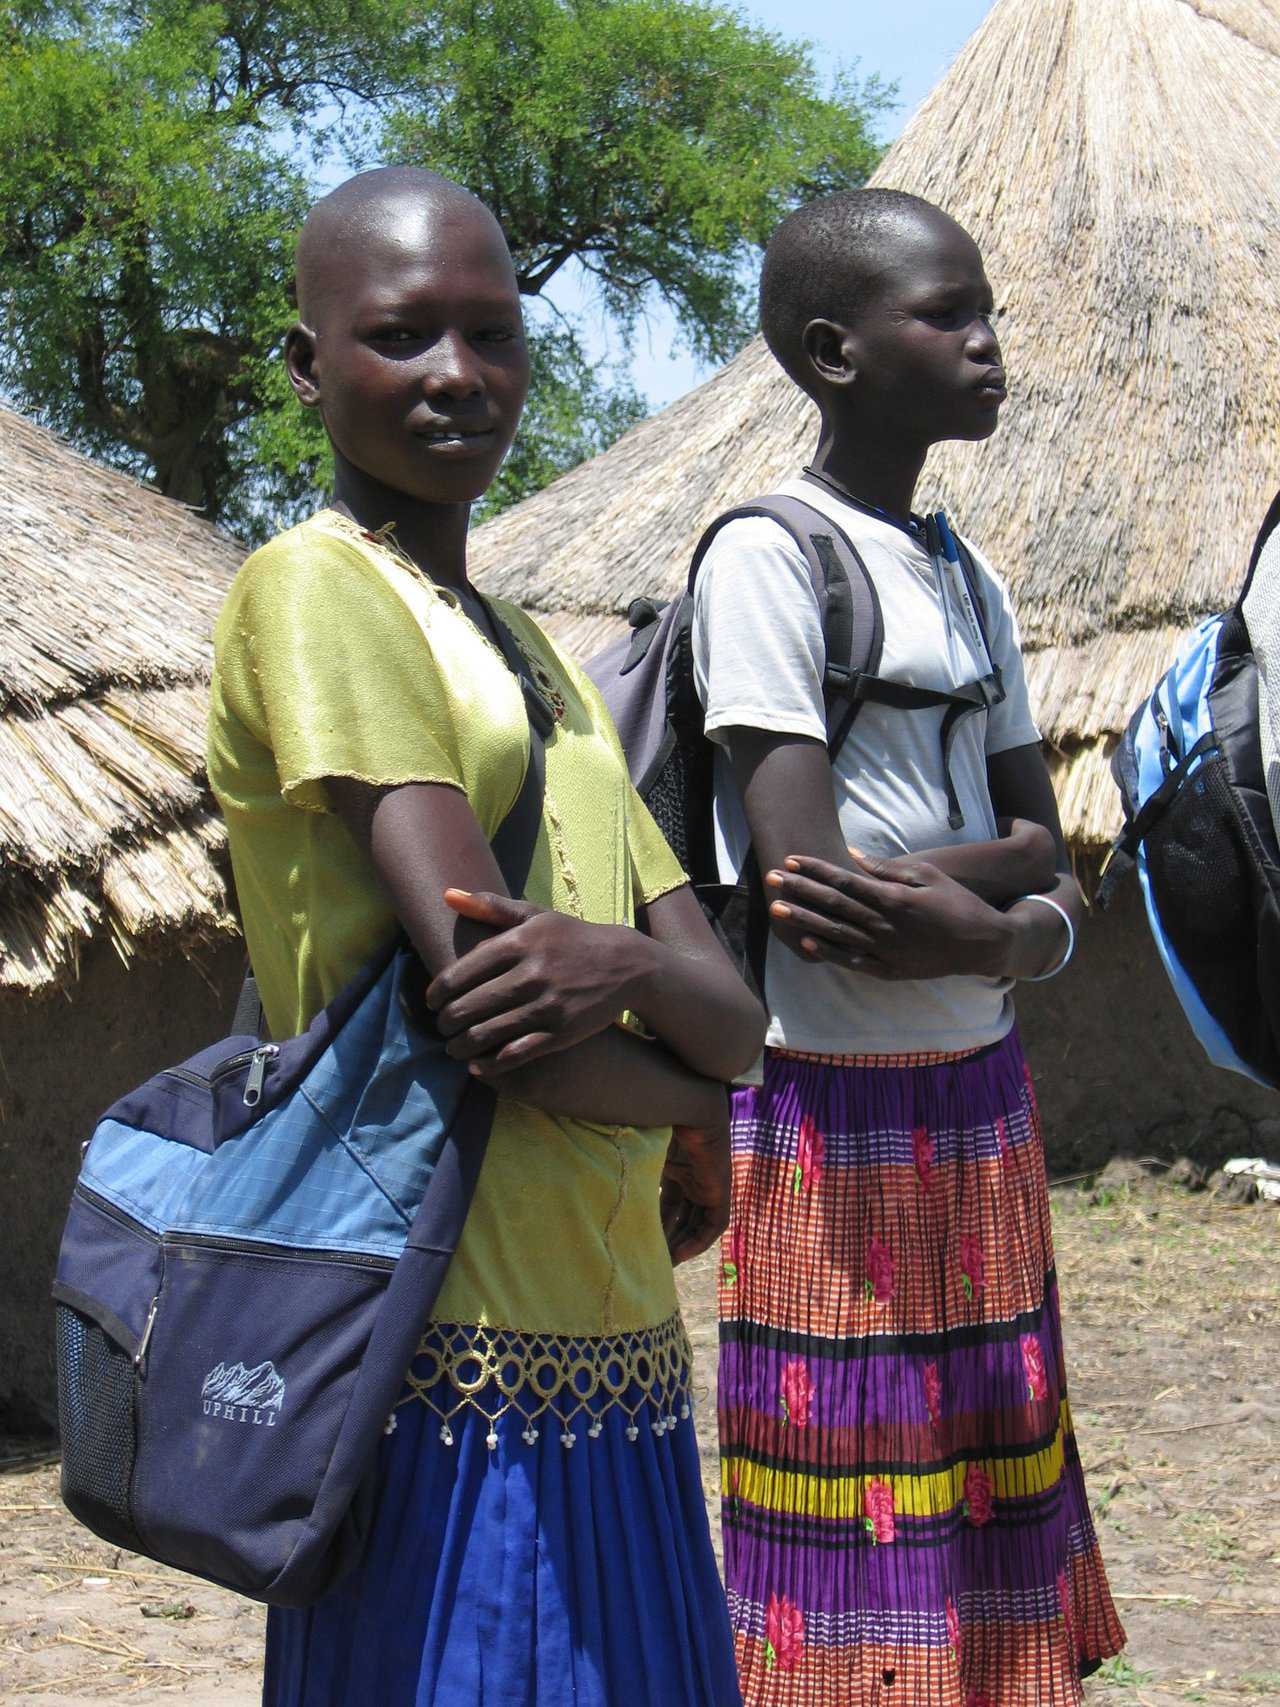 Backpacks — On their second trip to Sudan, Kristy and Abraham distributed more than 350 backpack kits including exercise books, pens, and pencils to the students in Yomchiir and Leilir Primary Schools. They still have 1 ton of school supplies to ship and distribute to the children in Southern Sudan.